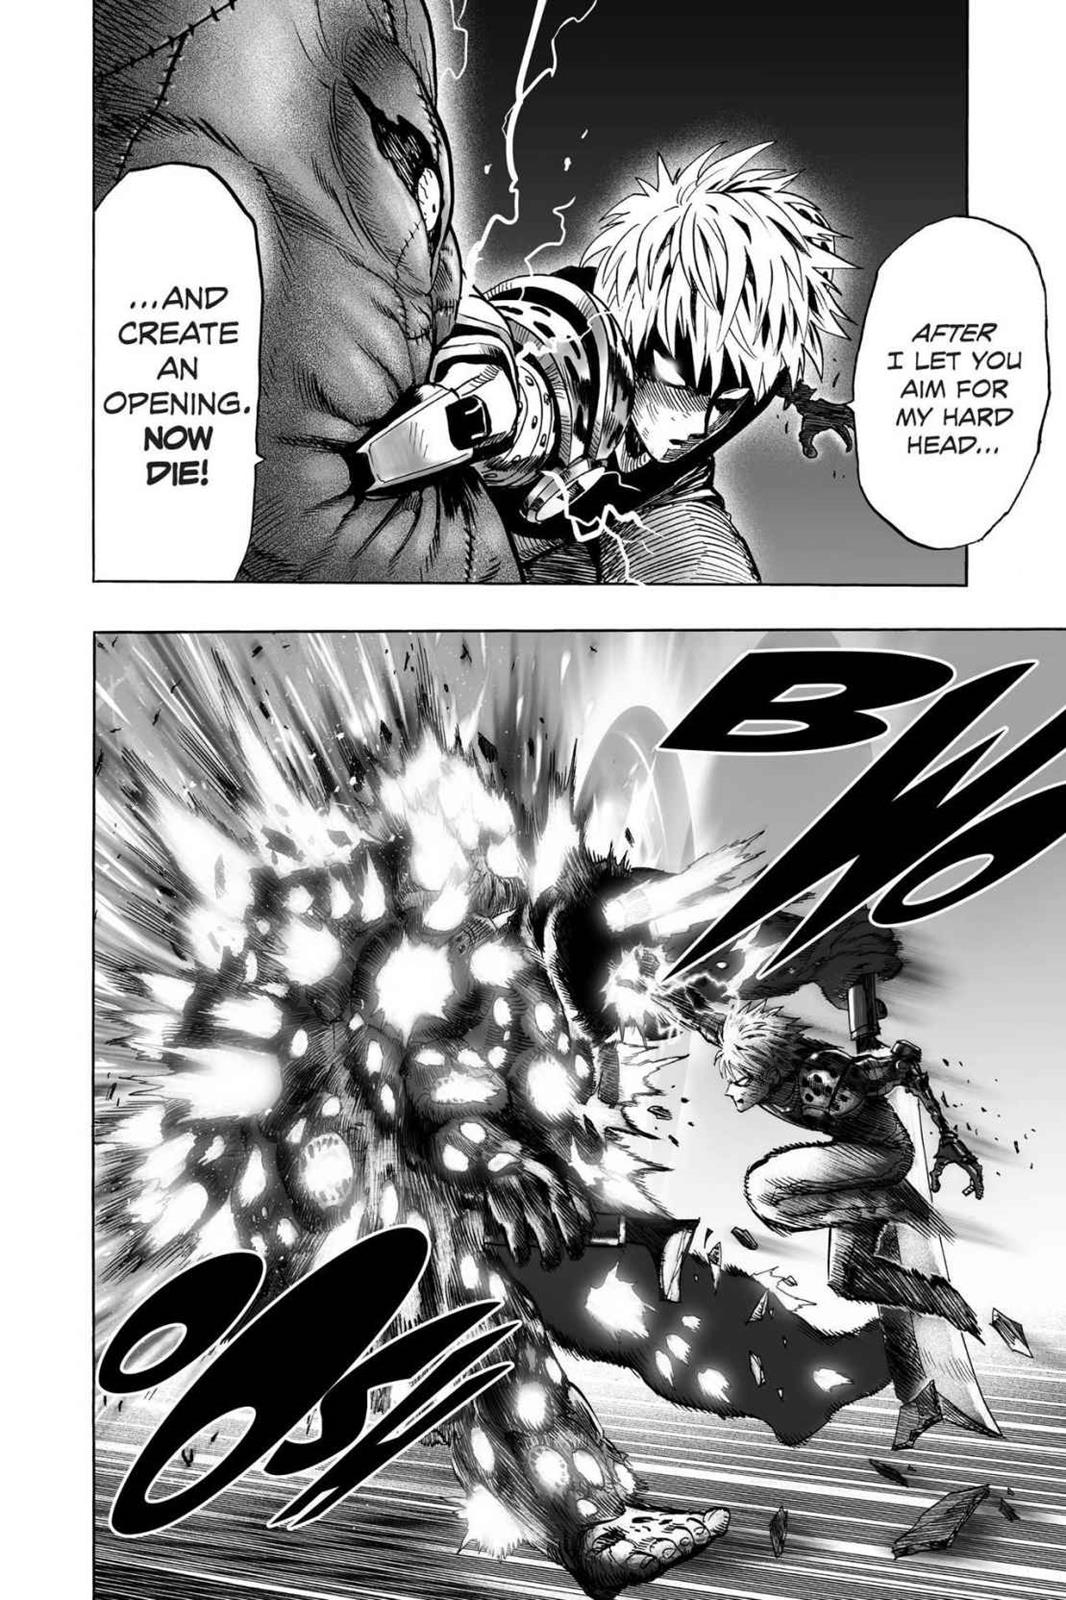 One-Punch Man, Punch 63 image 30